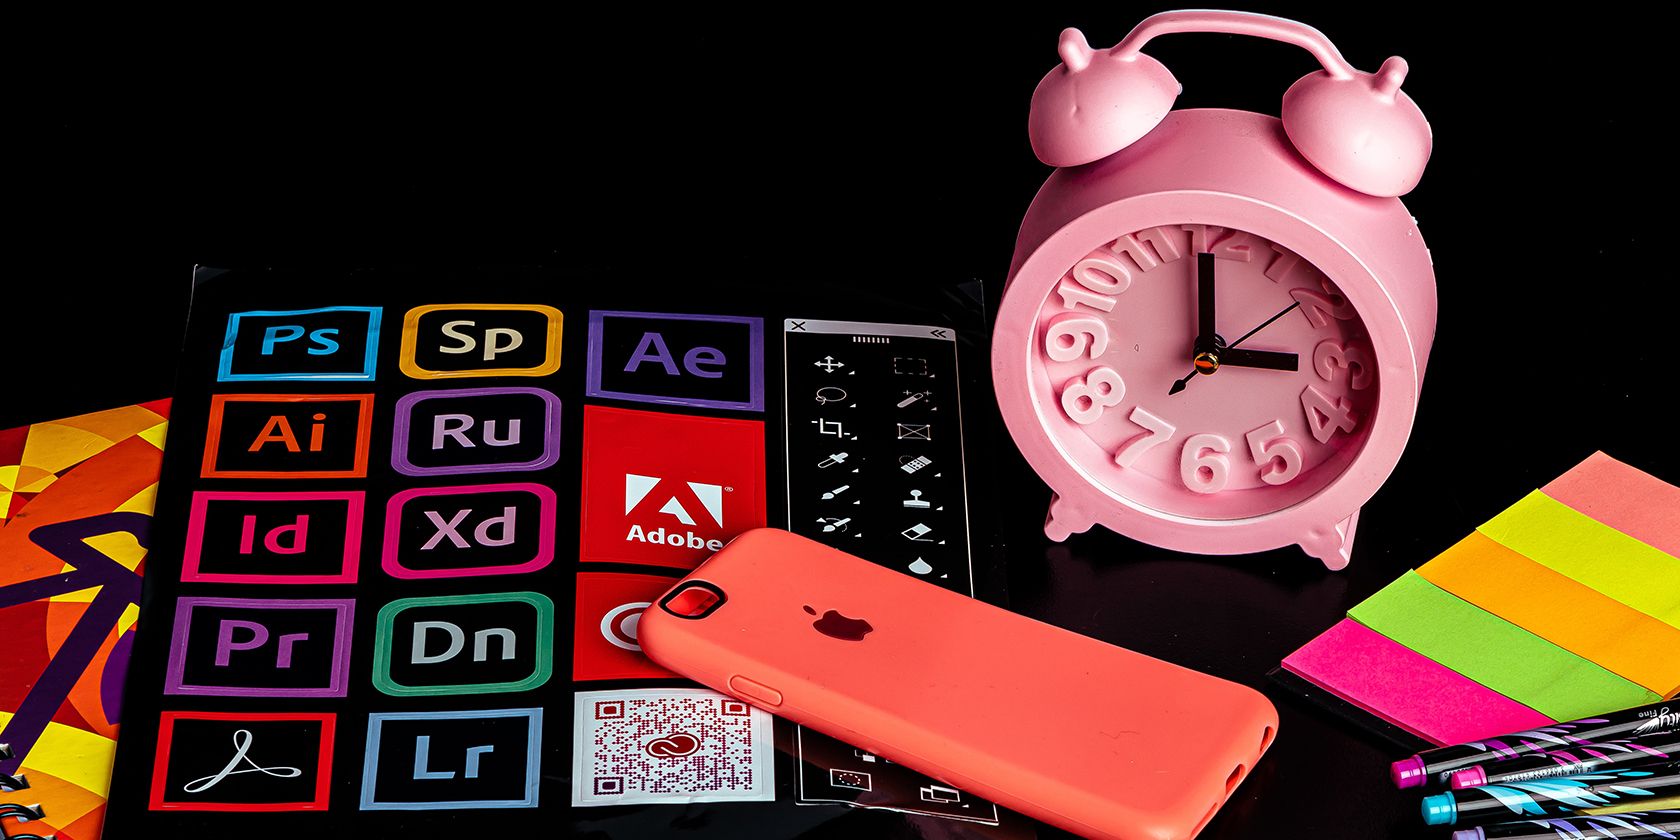 Adobe product logos and a pink alarm clock, red iPhone, and colored post-its.